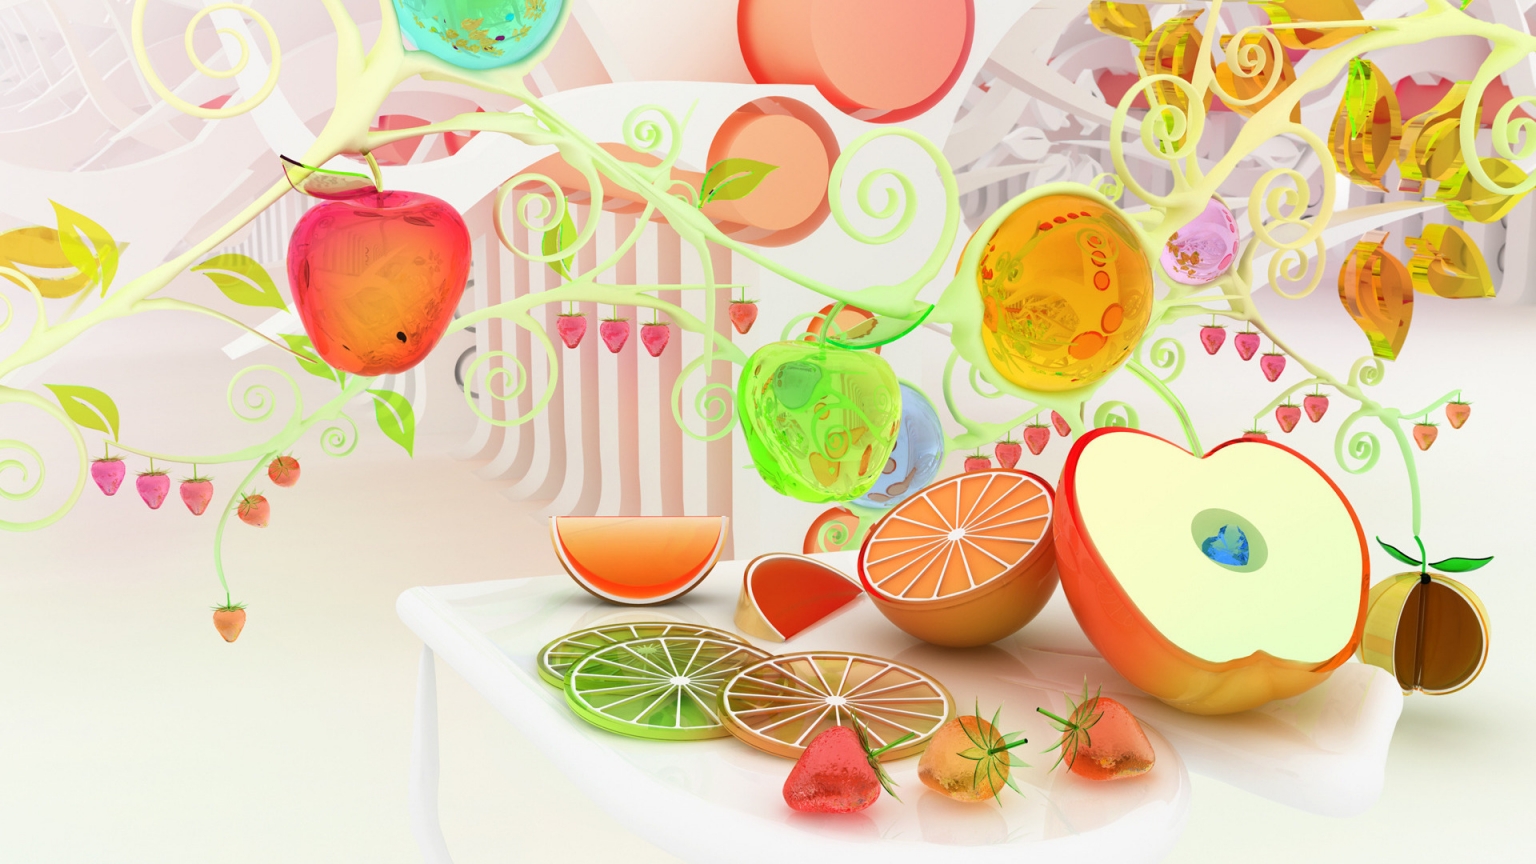 Fruits for 1536 x 864 HDTV resolution